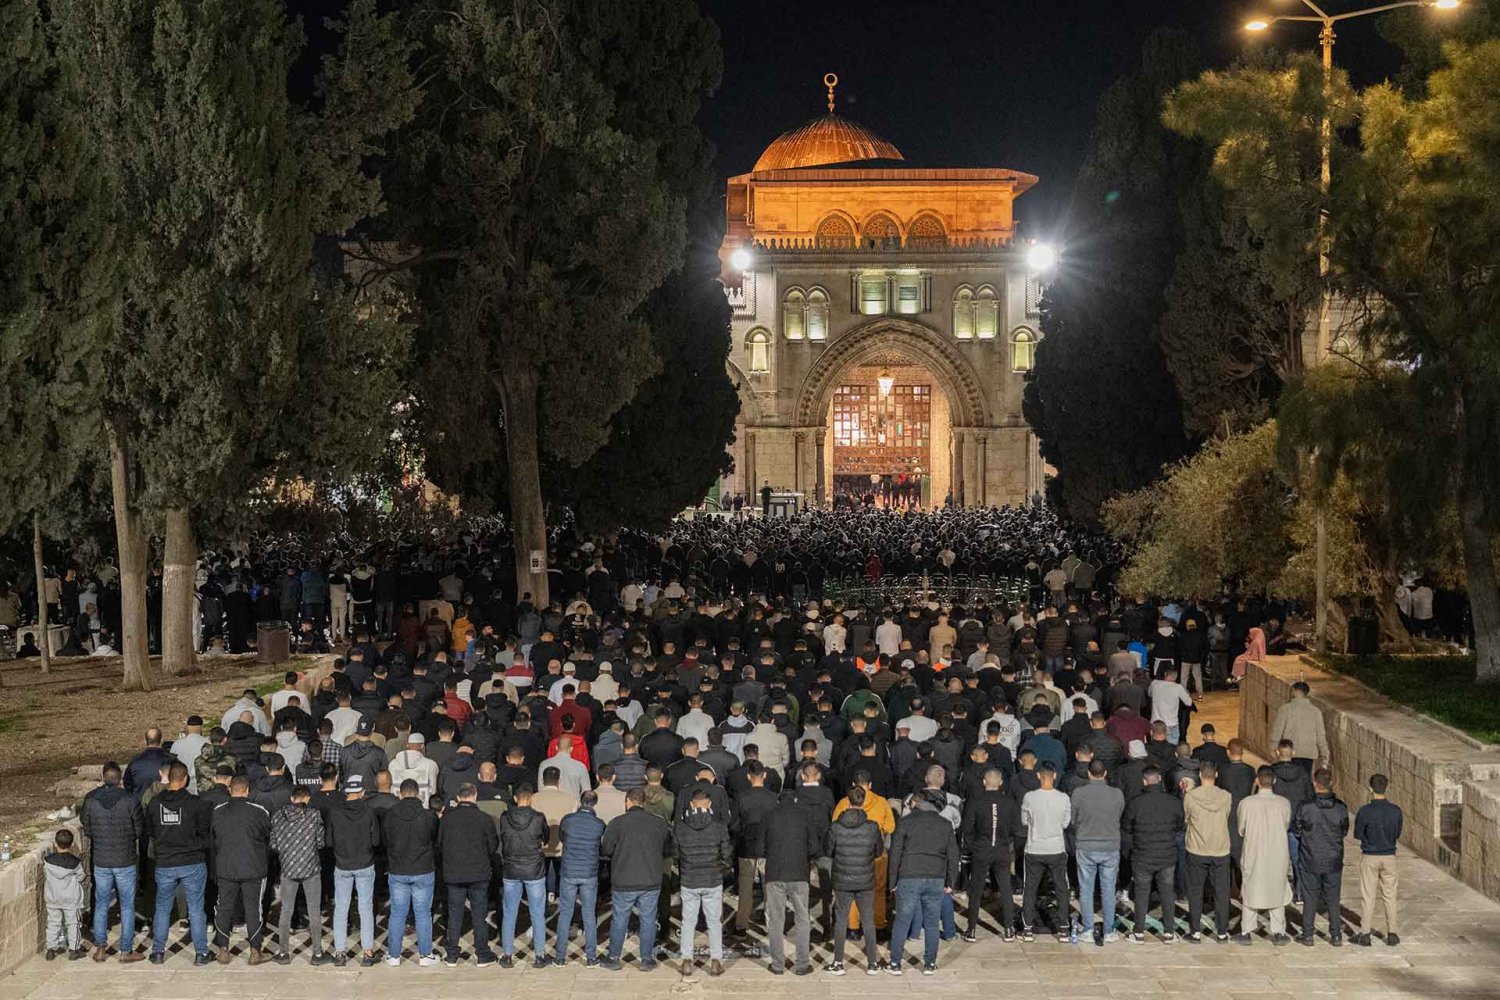 Evening prayers at the al-Aqsa Mosque in Jerusalem’s Old City